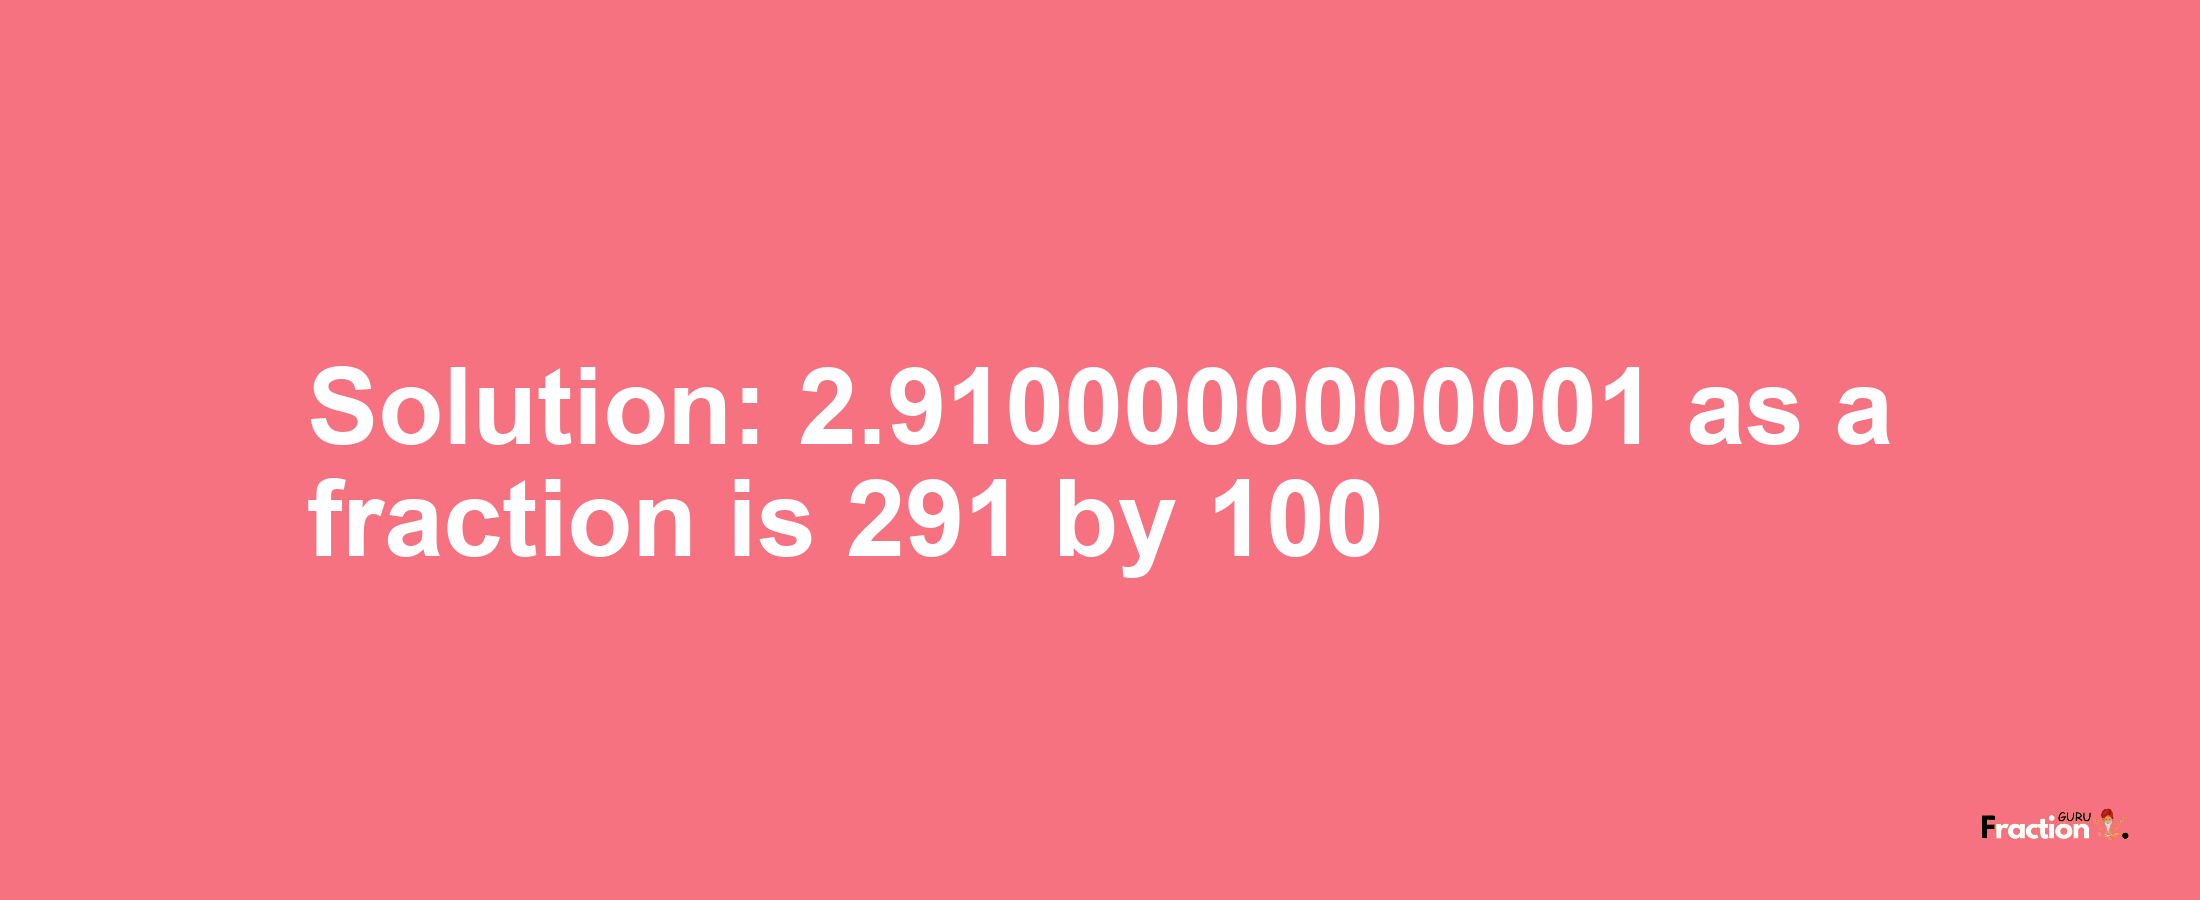 Solution:2.9100000000001 as a fraction is 291/100